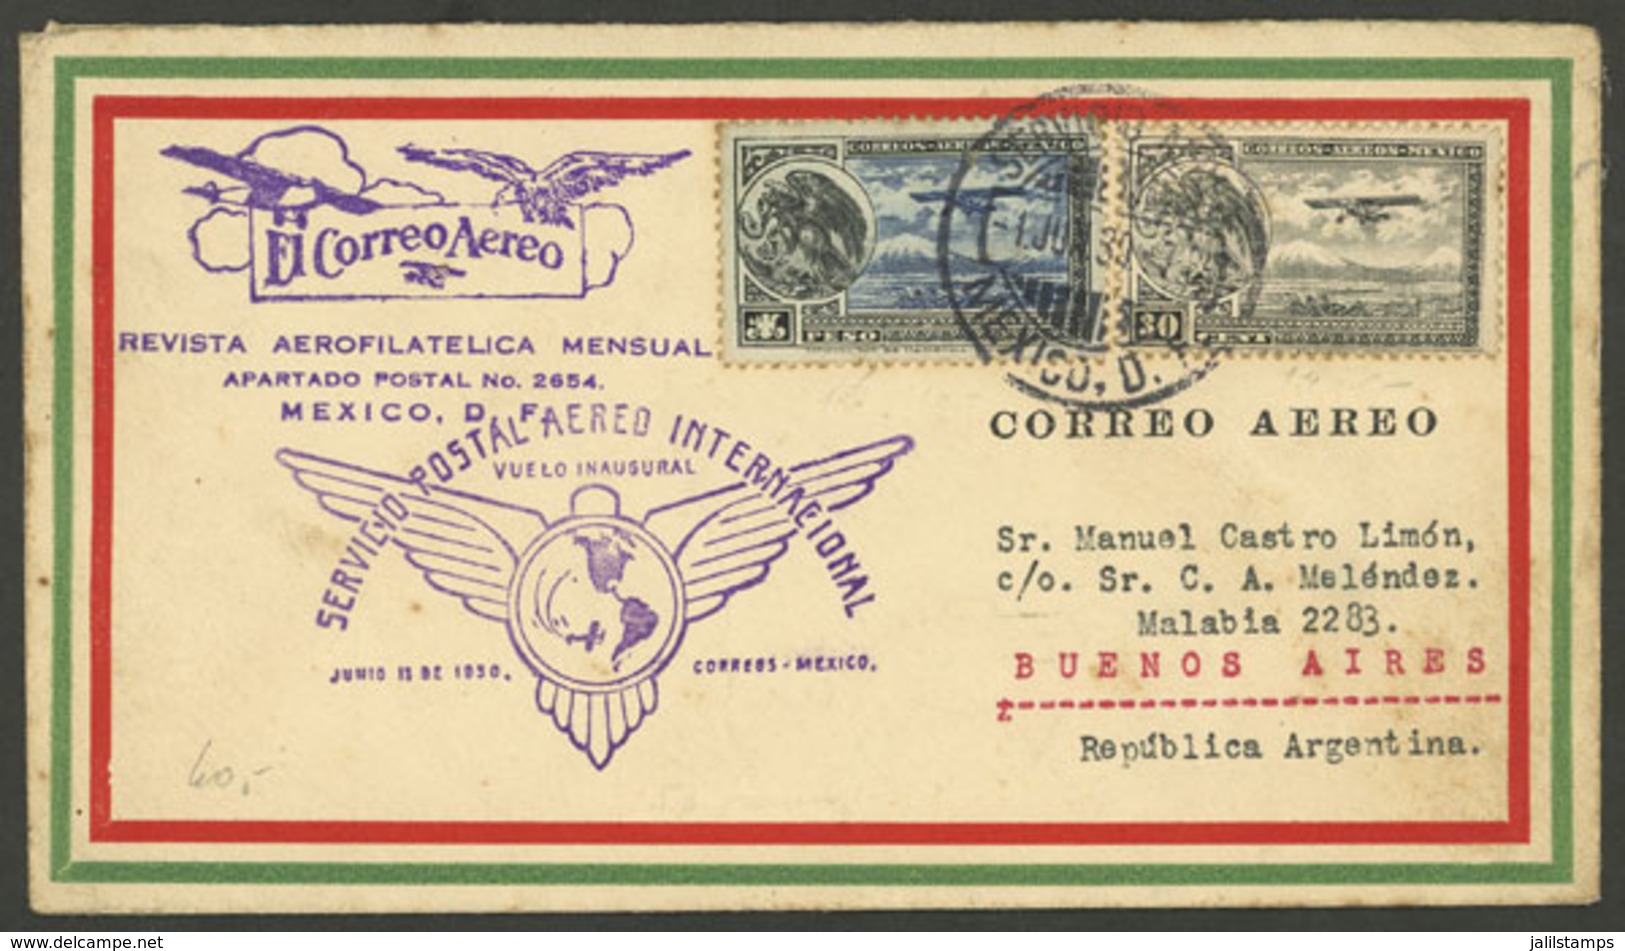 MEXICO: 1/JUL/1930 Mexico - Argentina, First Flight, Cover Of VF Quality With Arrival Backstamp Of Buenos Aires, Scarce! - México